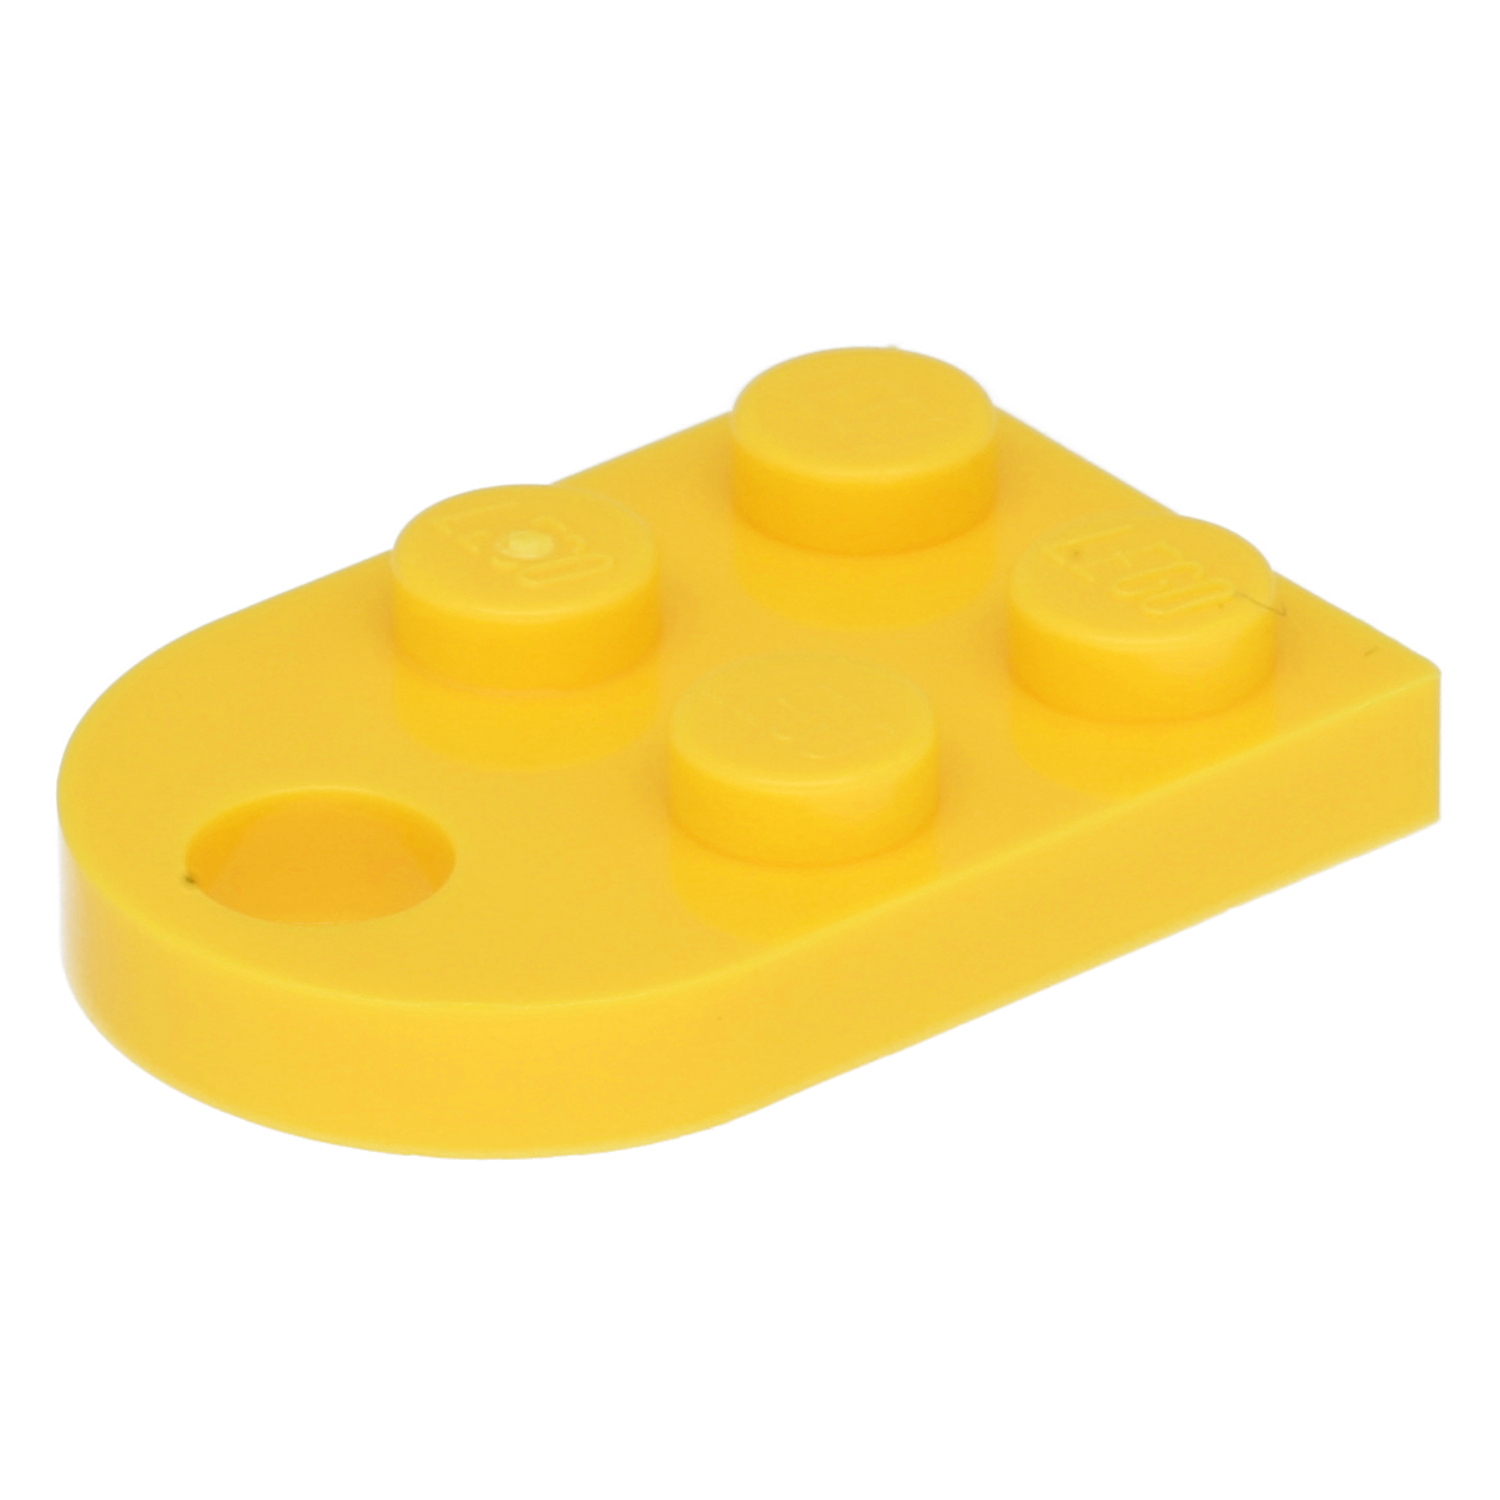 Lego plates (modified) - 2 x 3 rounded and a hole